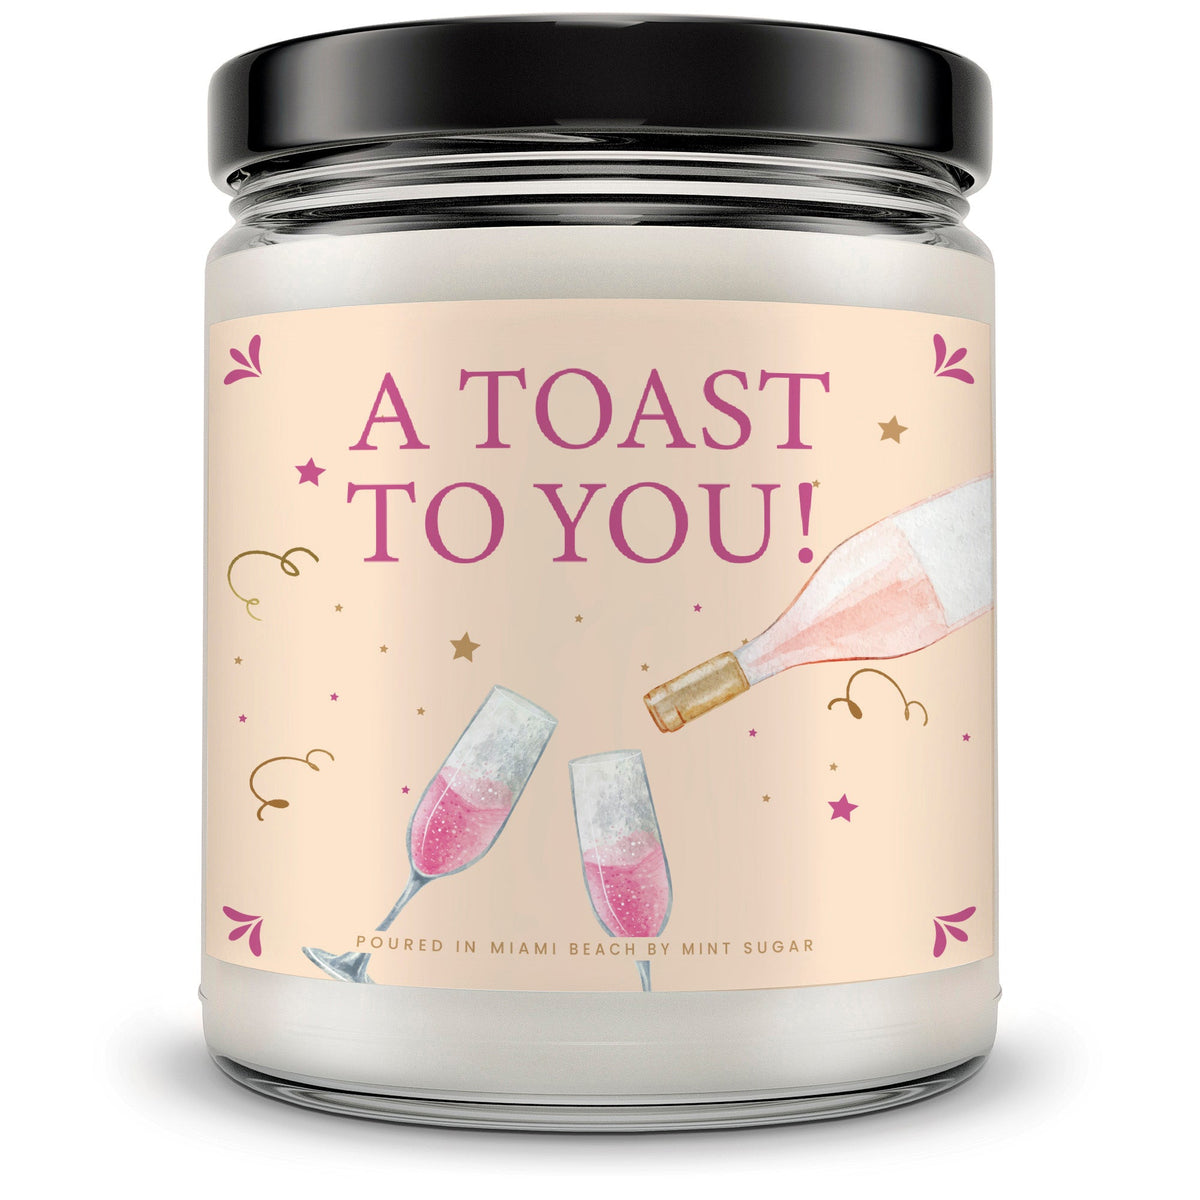 A toast to you! Candle - Mint Sugar Candle